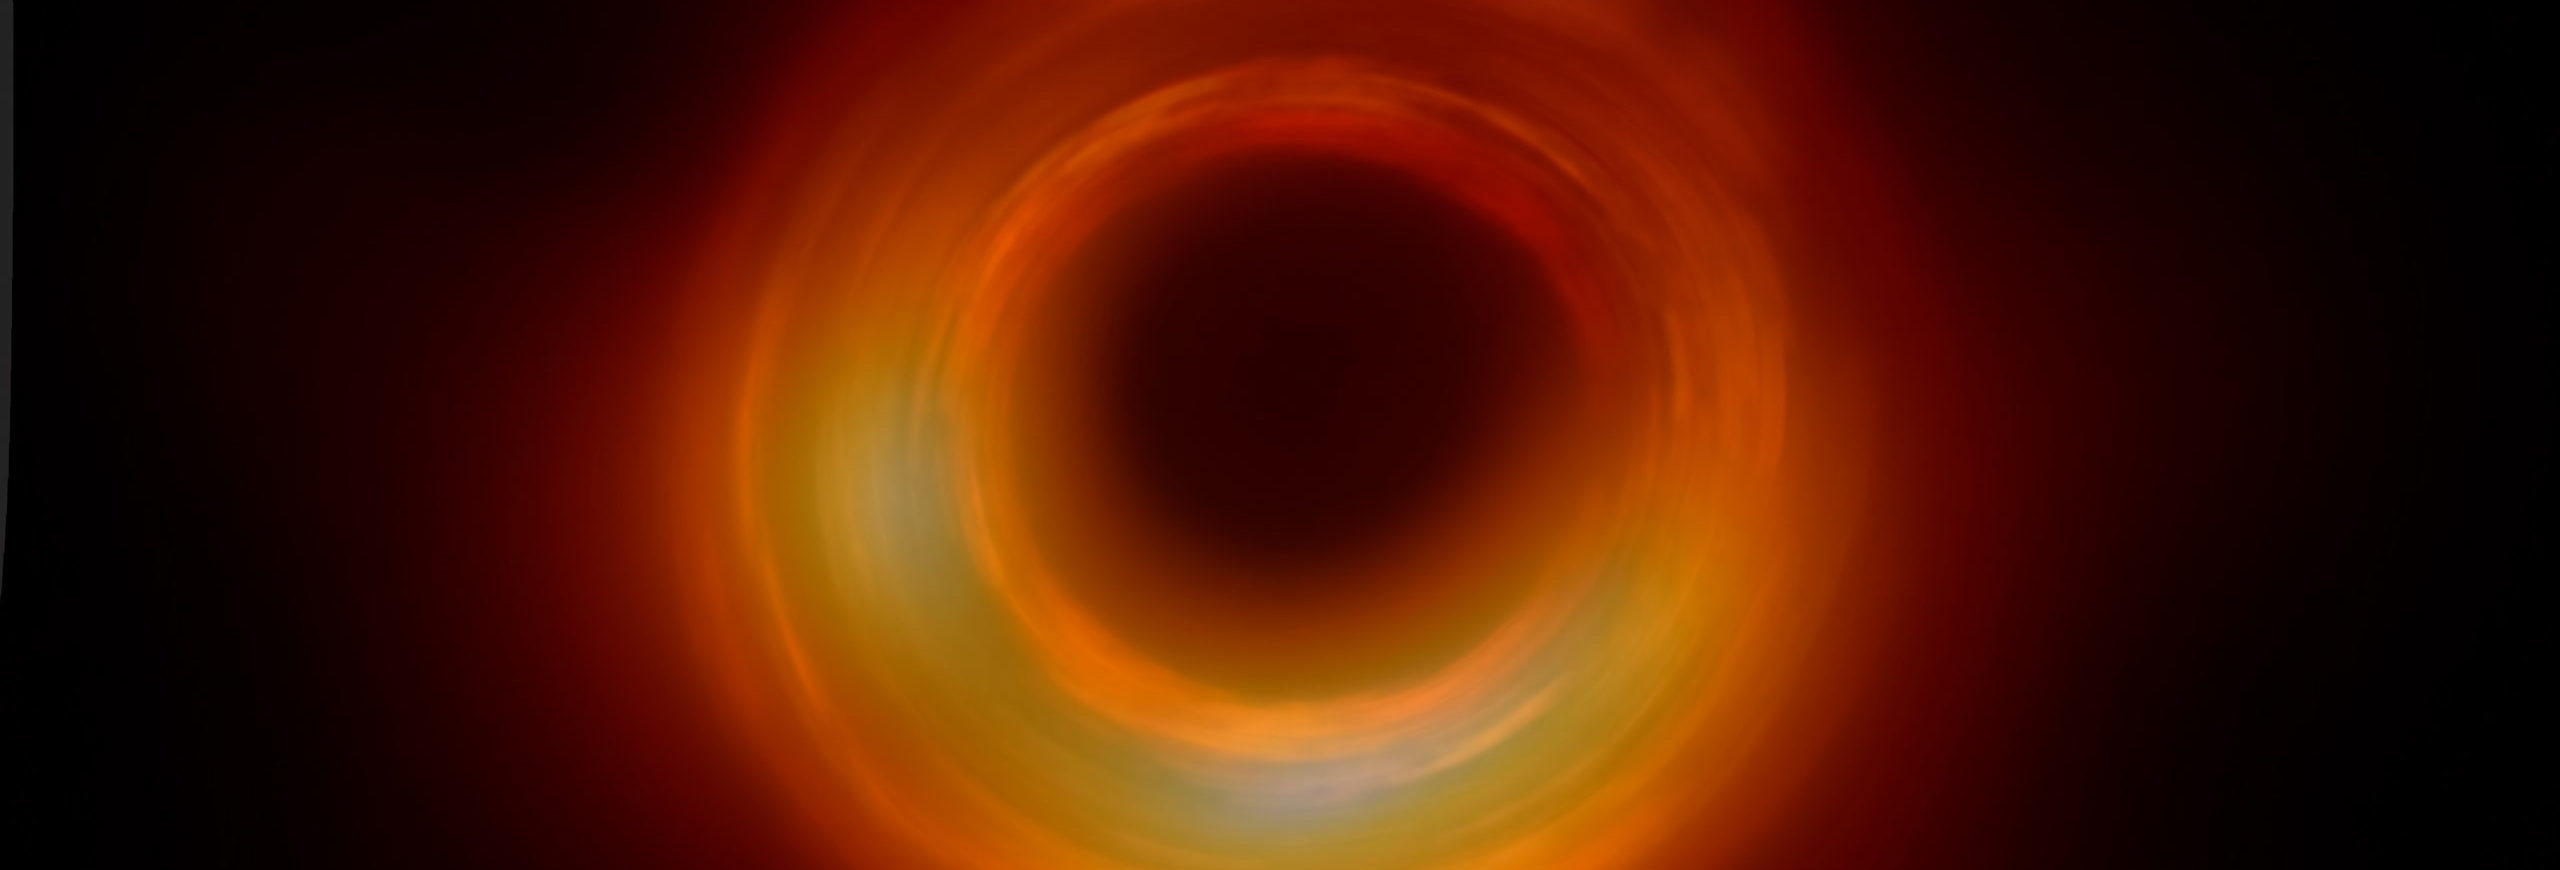 Are black holes stable? - Polytechnique Insights